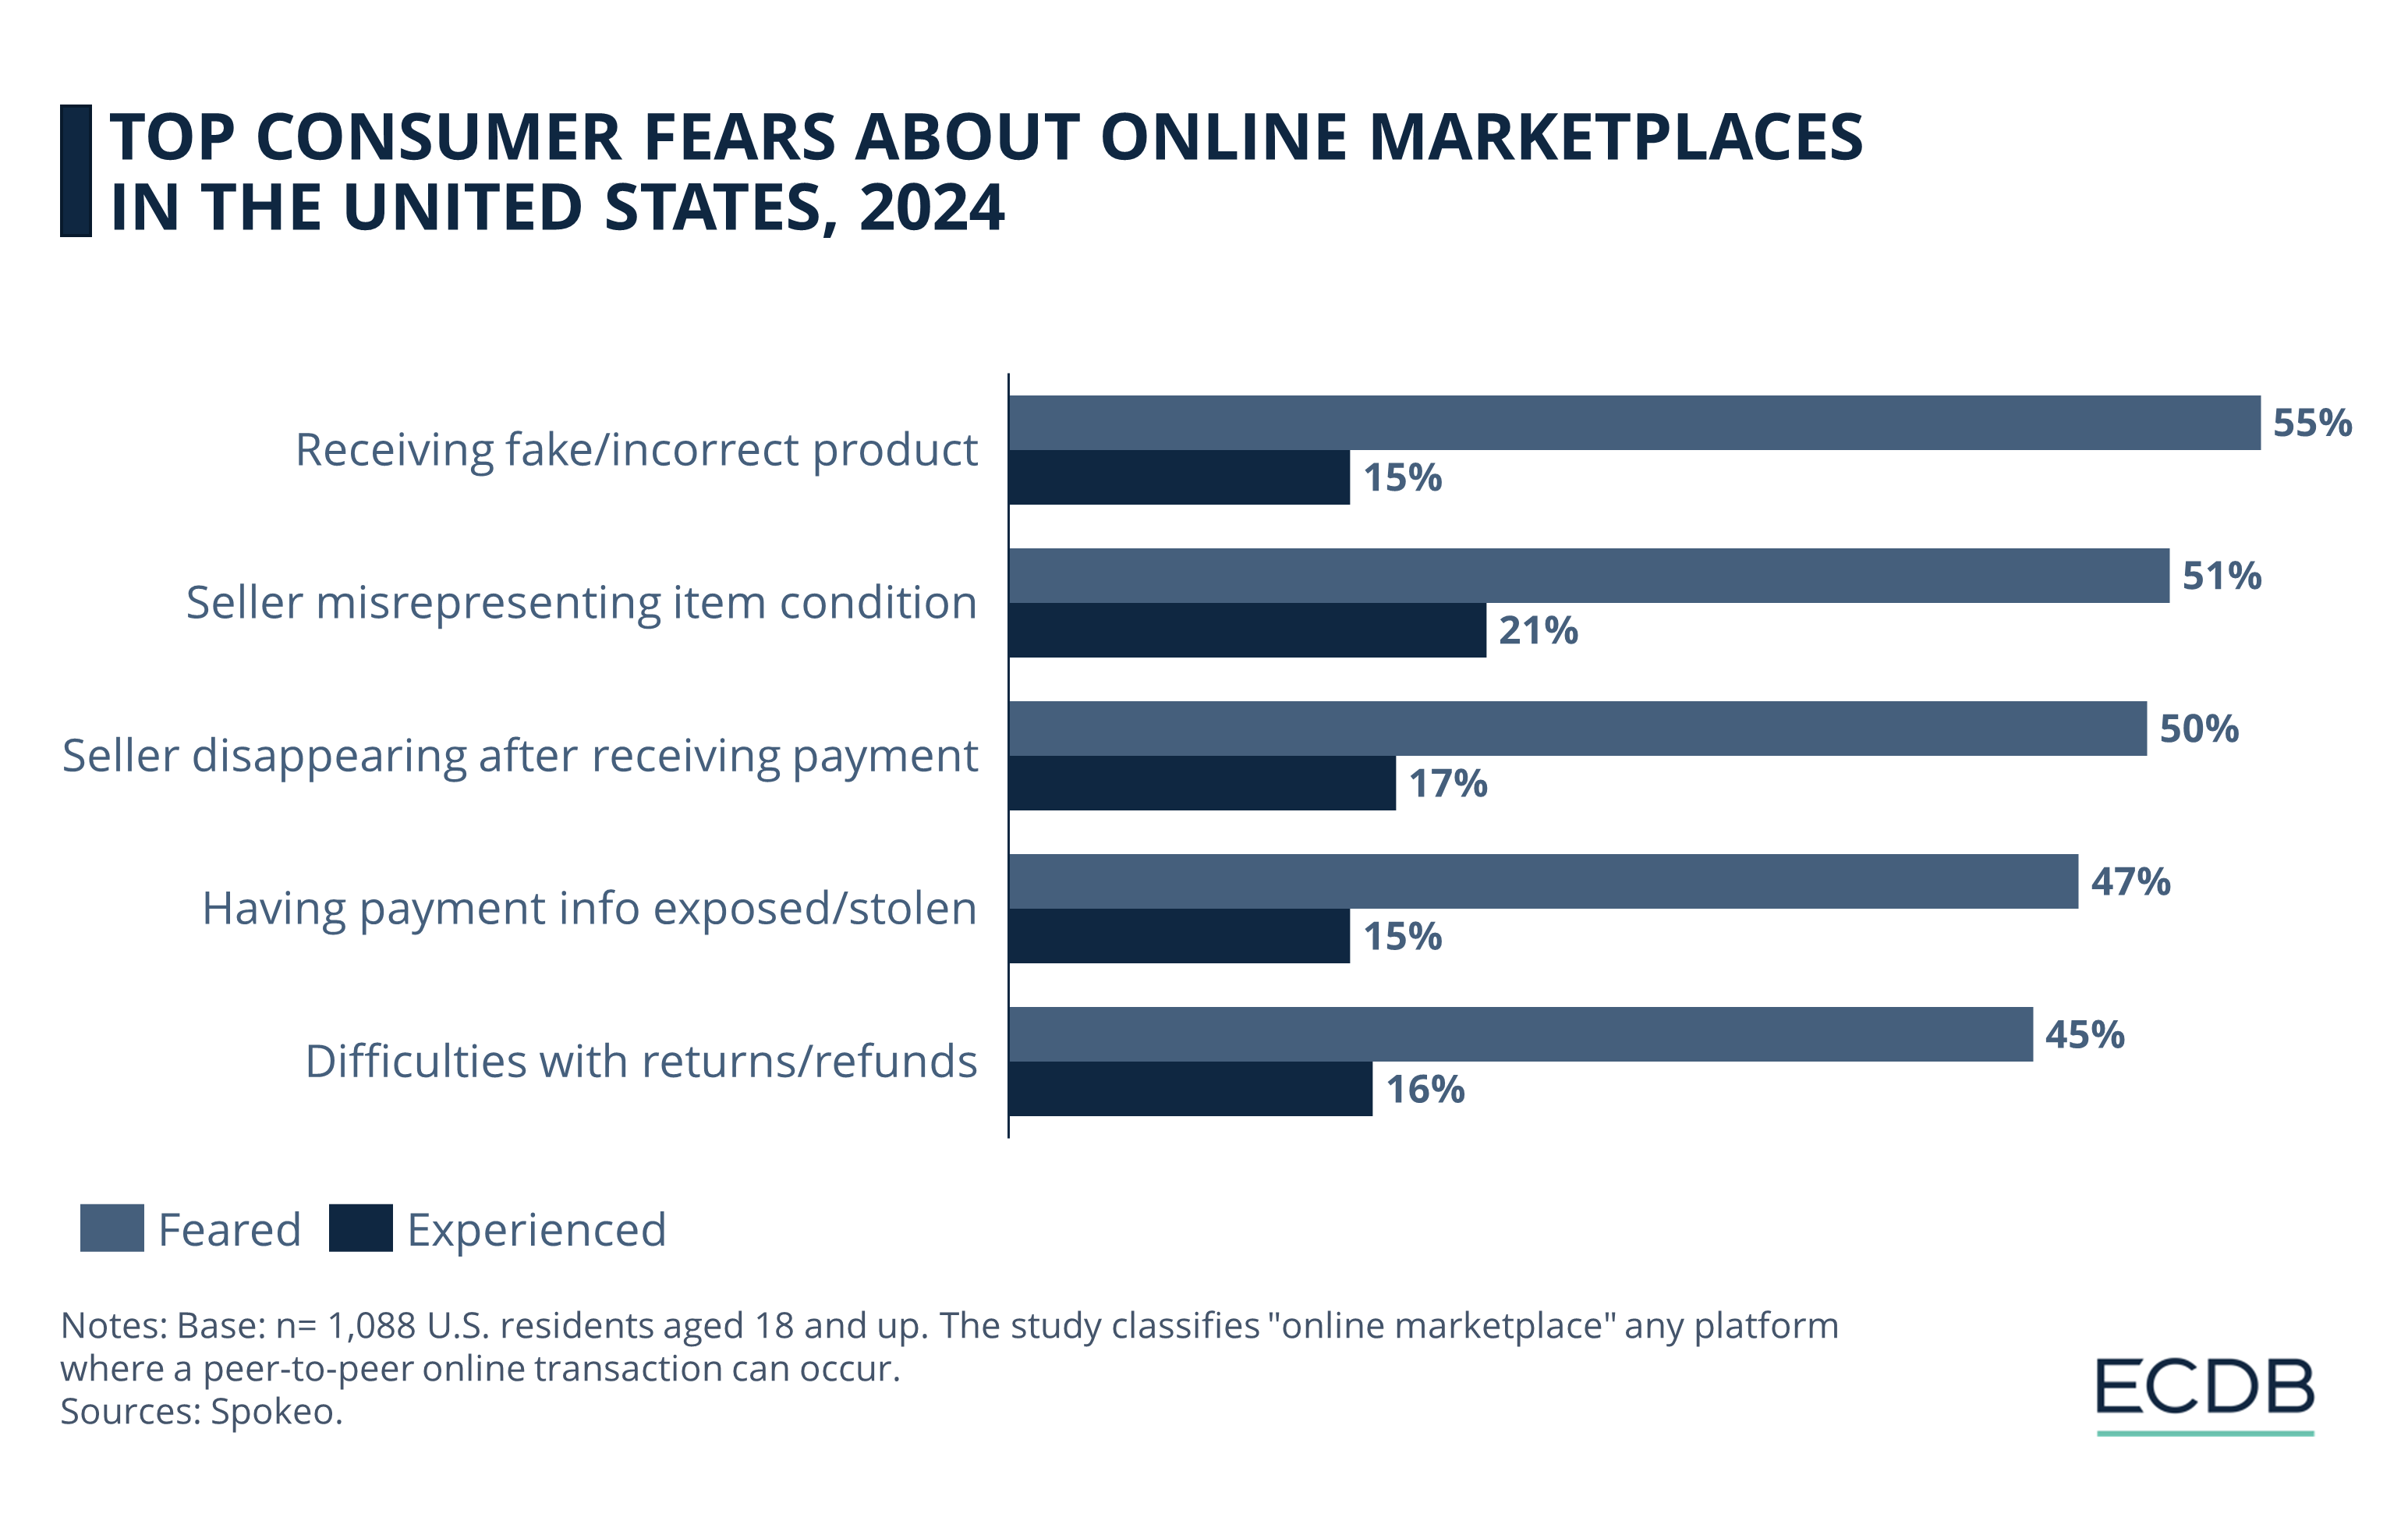 Top Consumer Fears About Online Marketplaces in the United States, 2024